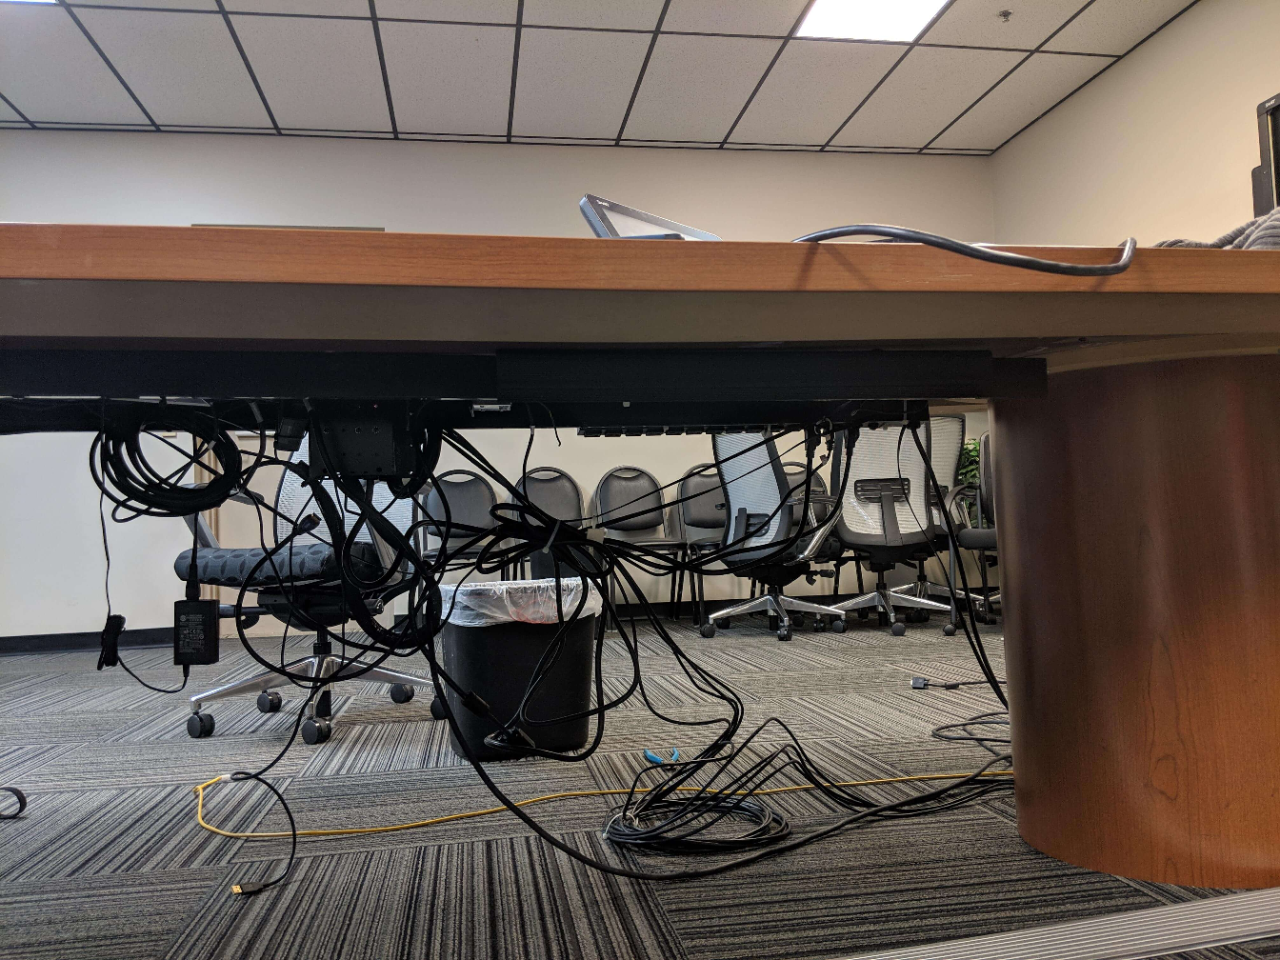 There is a desk full of messing and knotted cables in the meeting room.